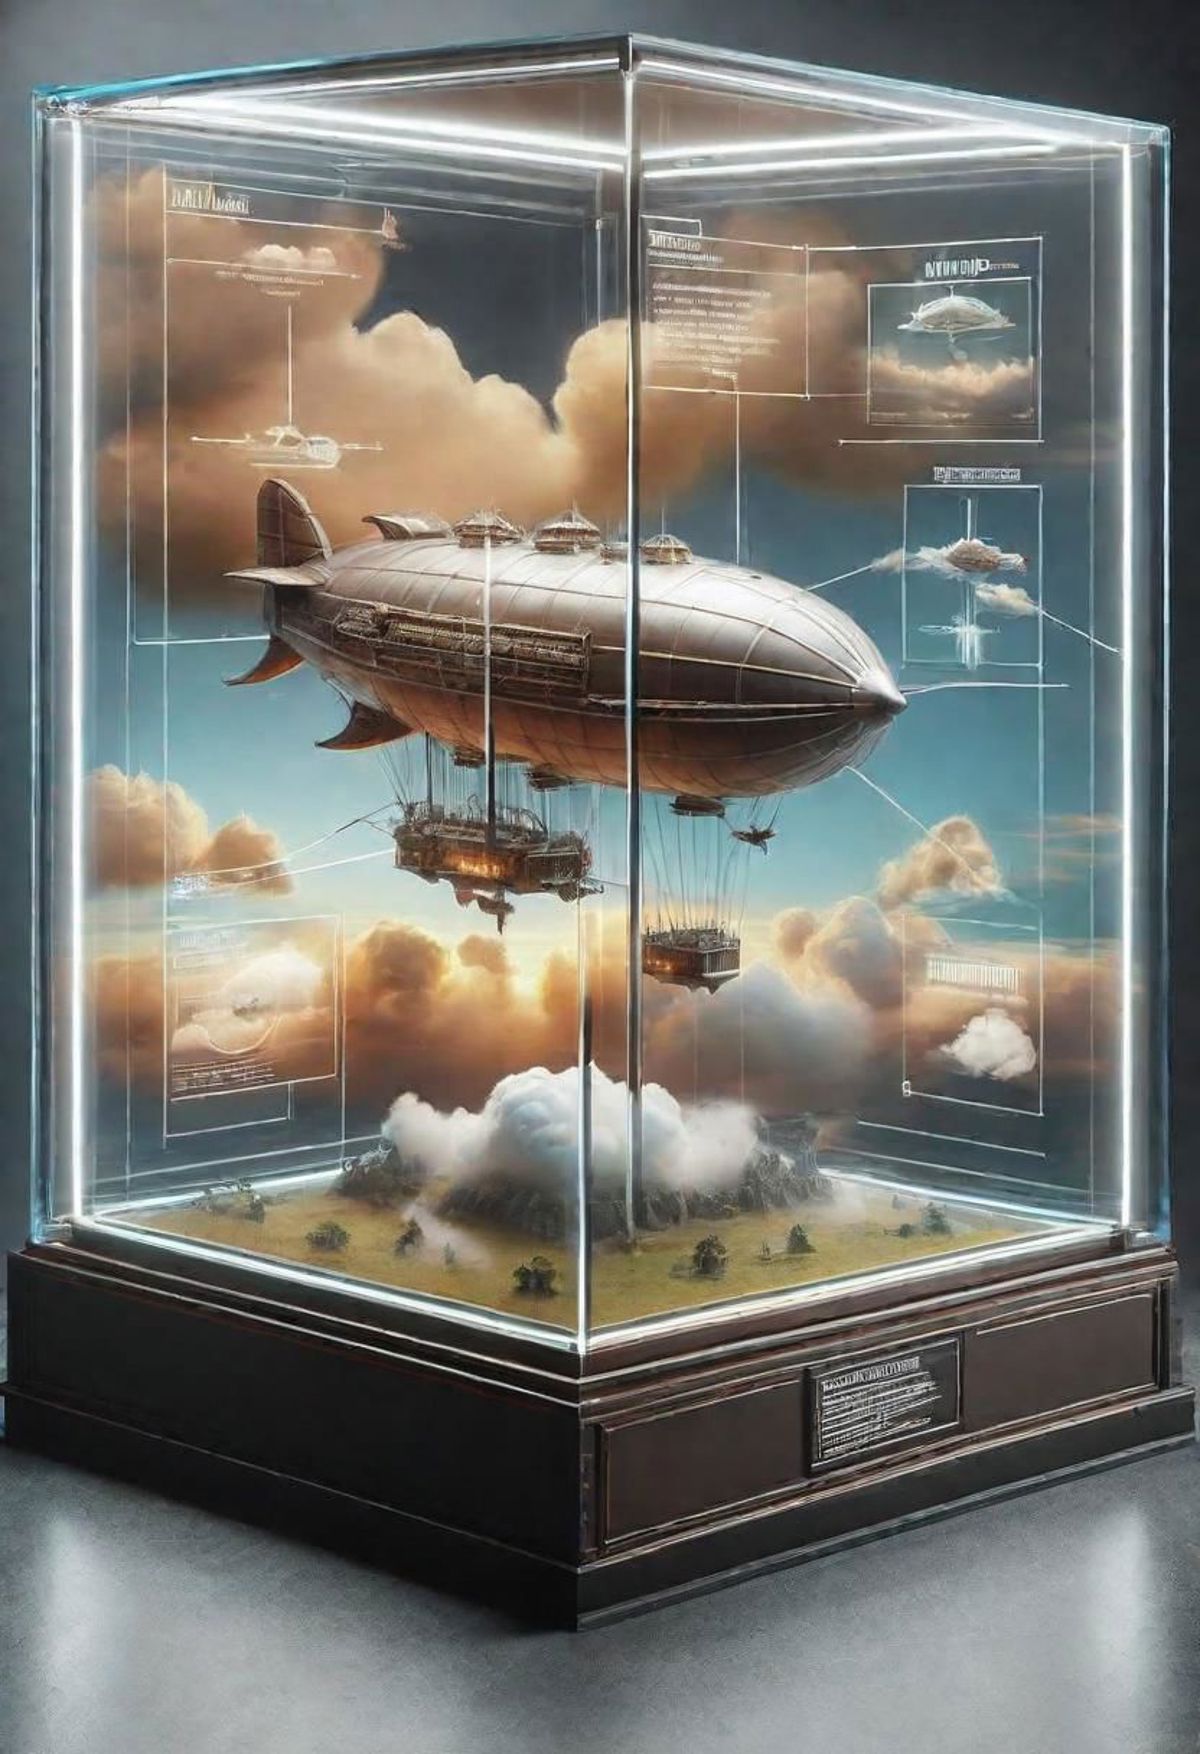 Artistic Display of a Steampunk Airship with a Diagram in a Glass Case